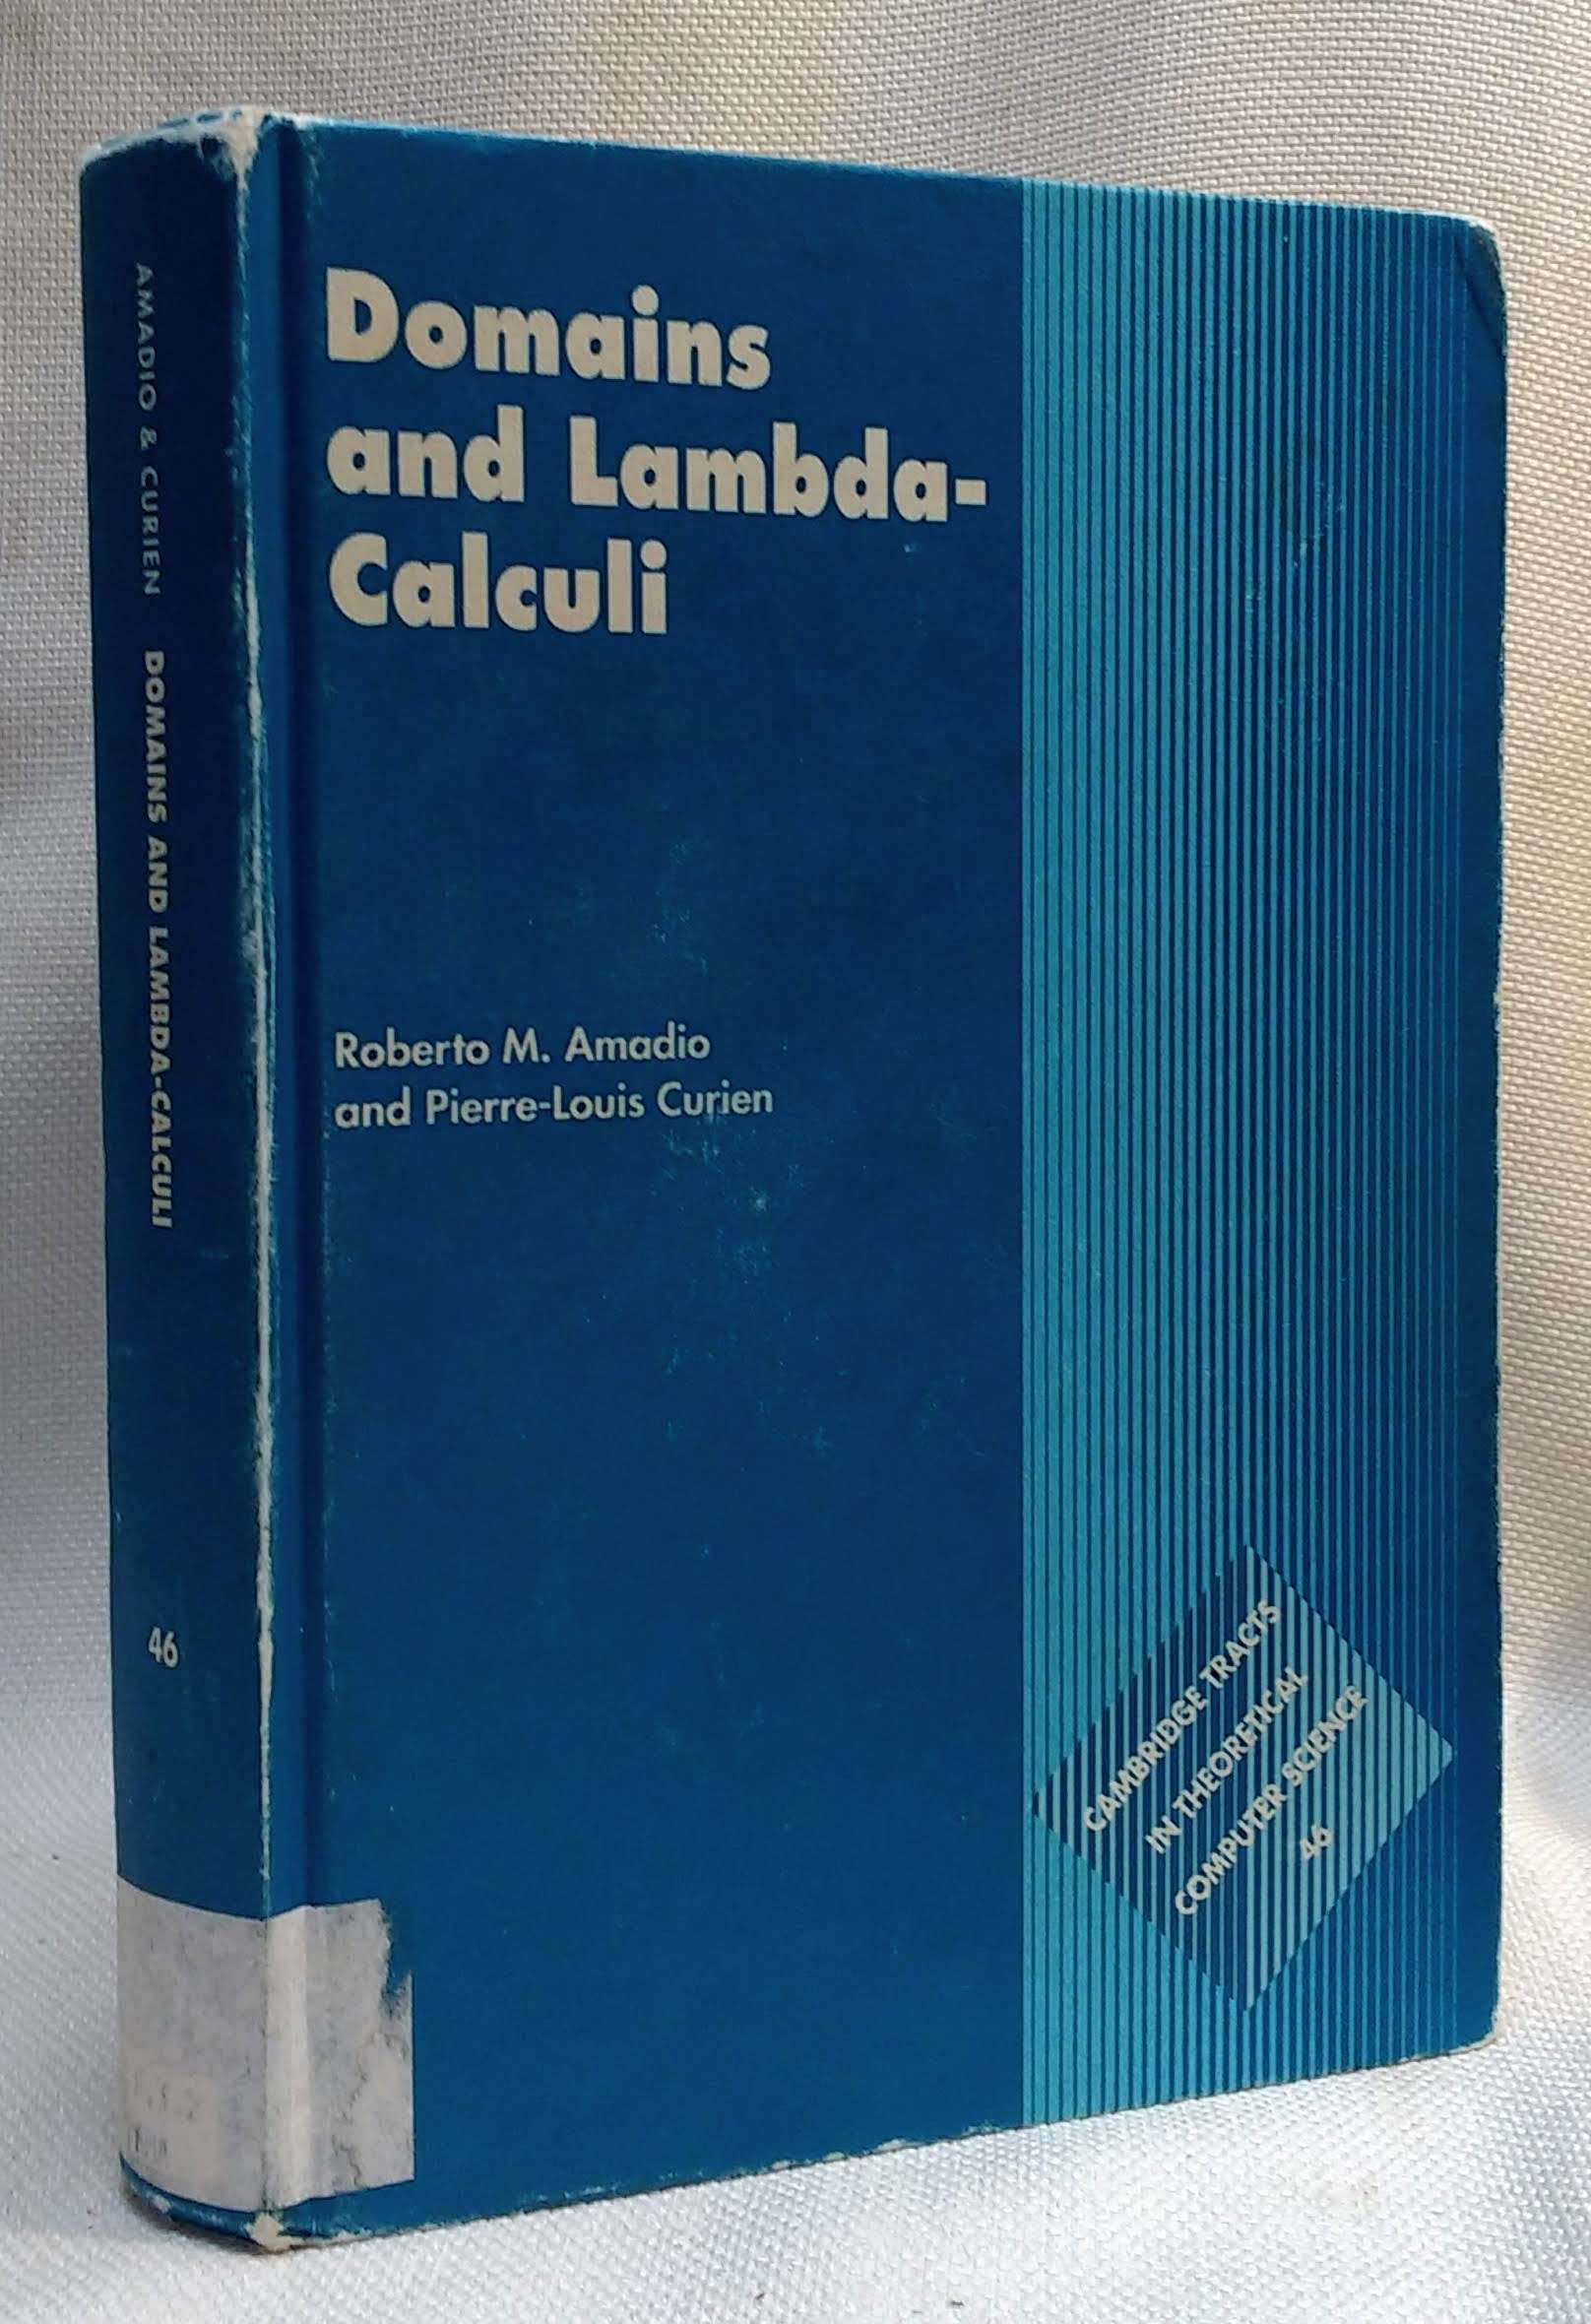 Image for Domains and Lambda-Calculi (Cambridge Tracts in Theoretical Computer Science, Series Number 46)